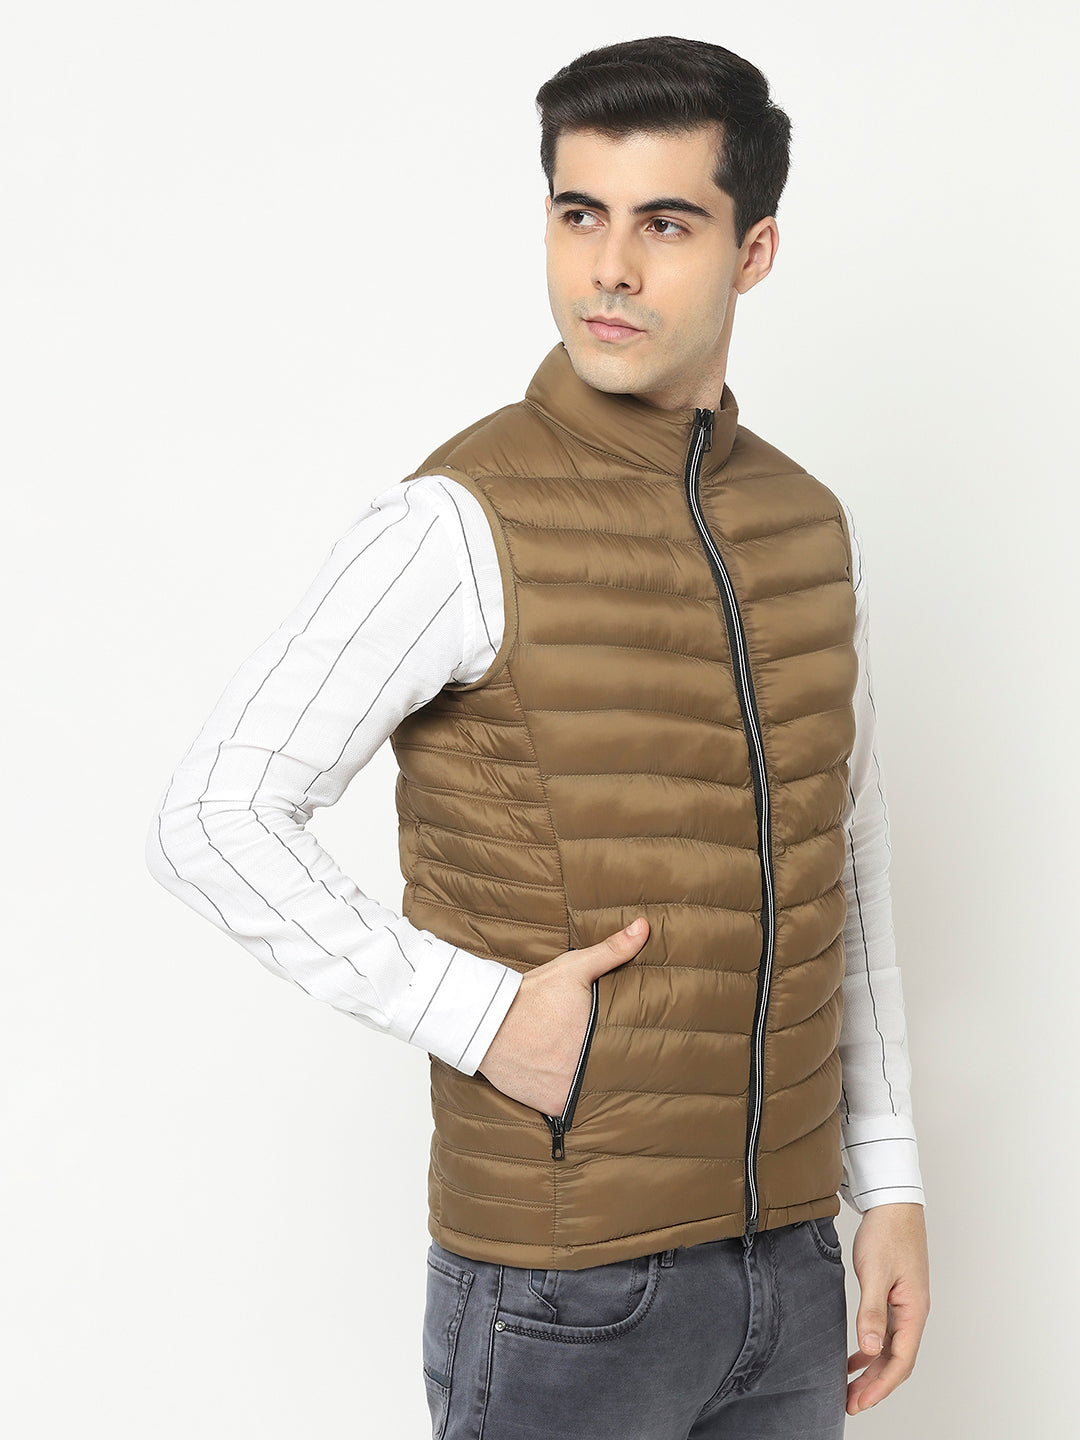  Brown Padded Jacket in Sleeveless Cut 